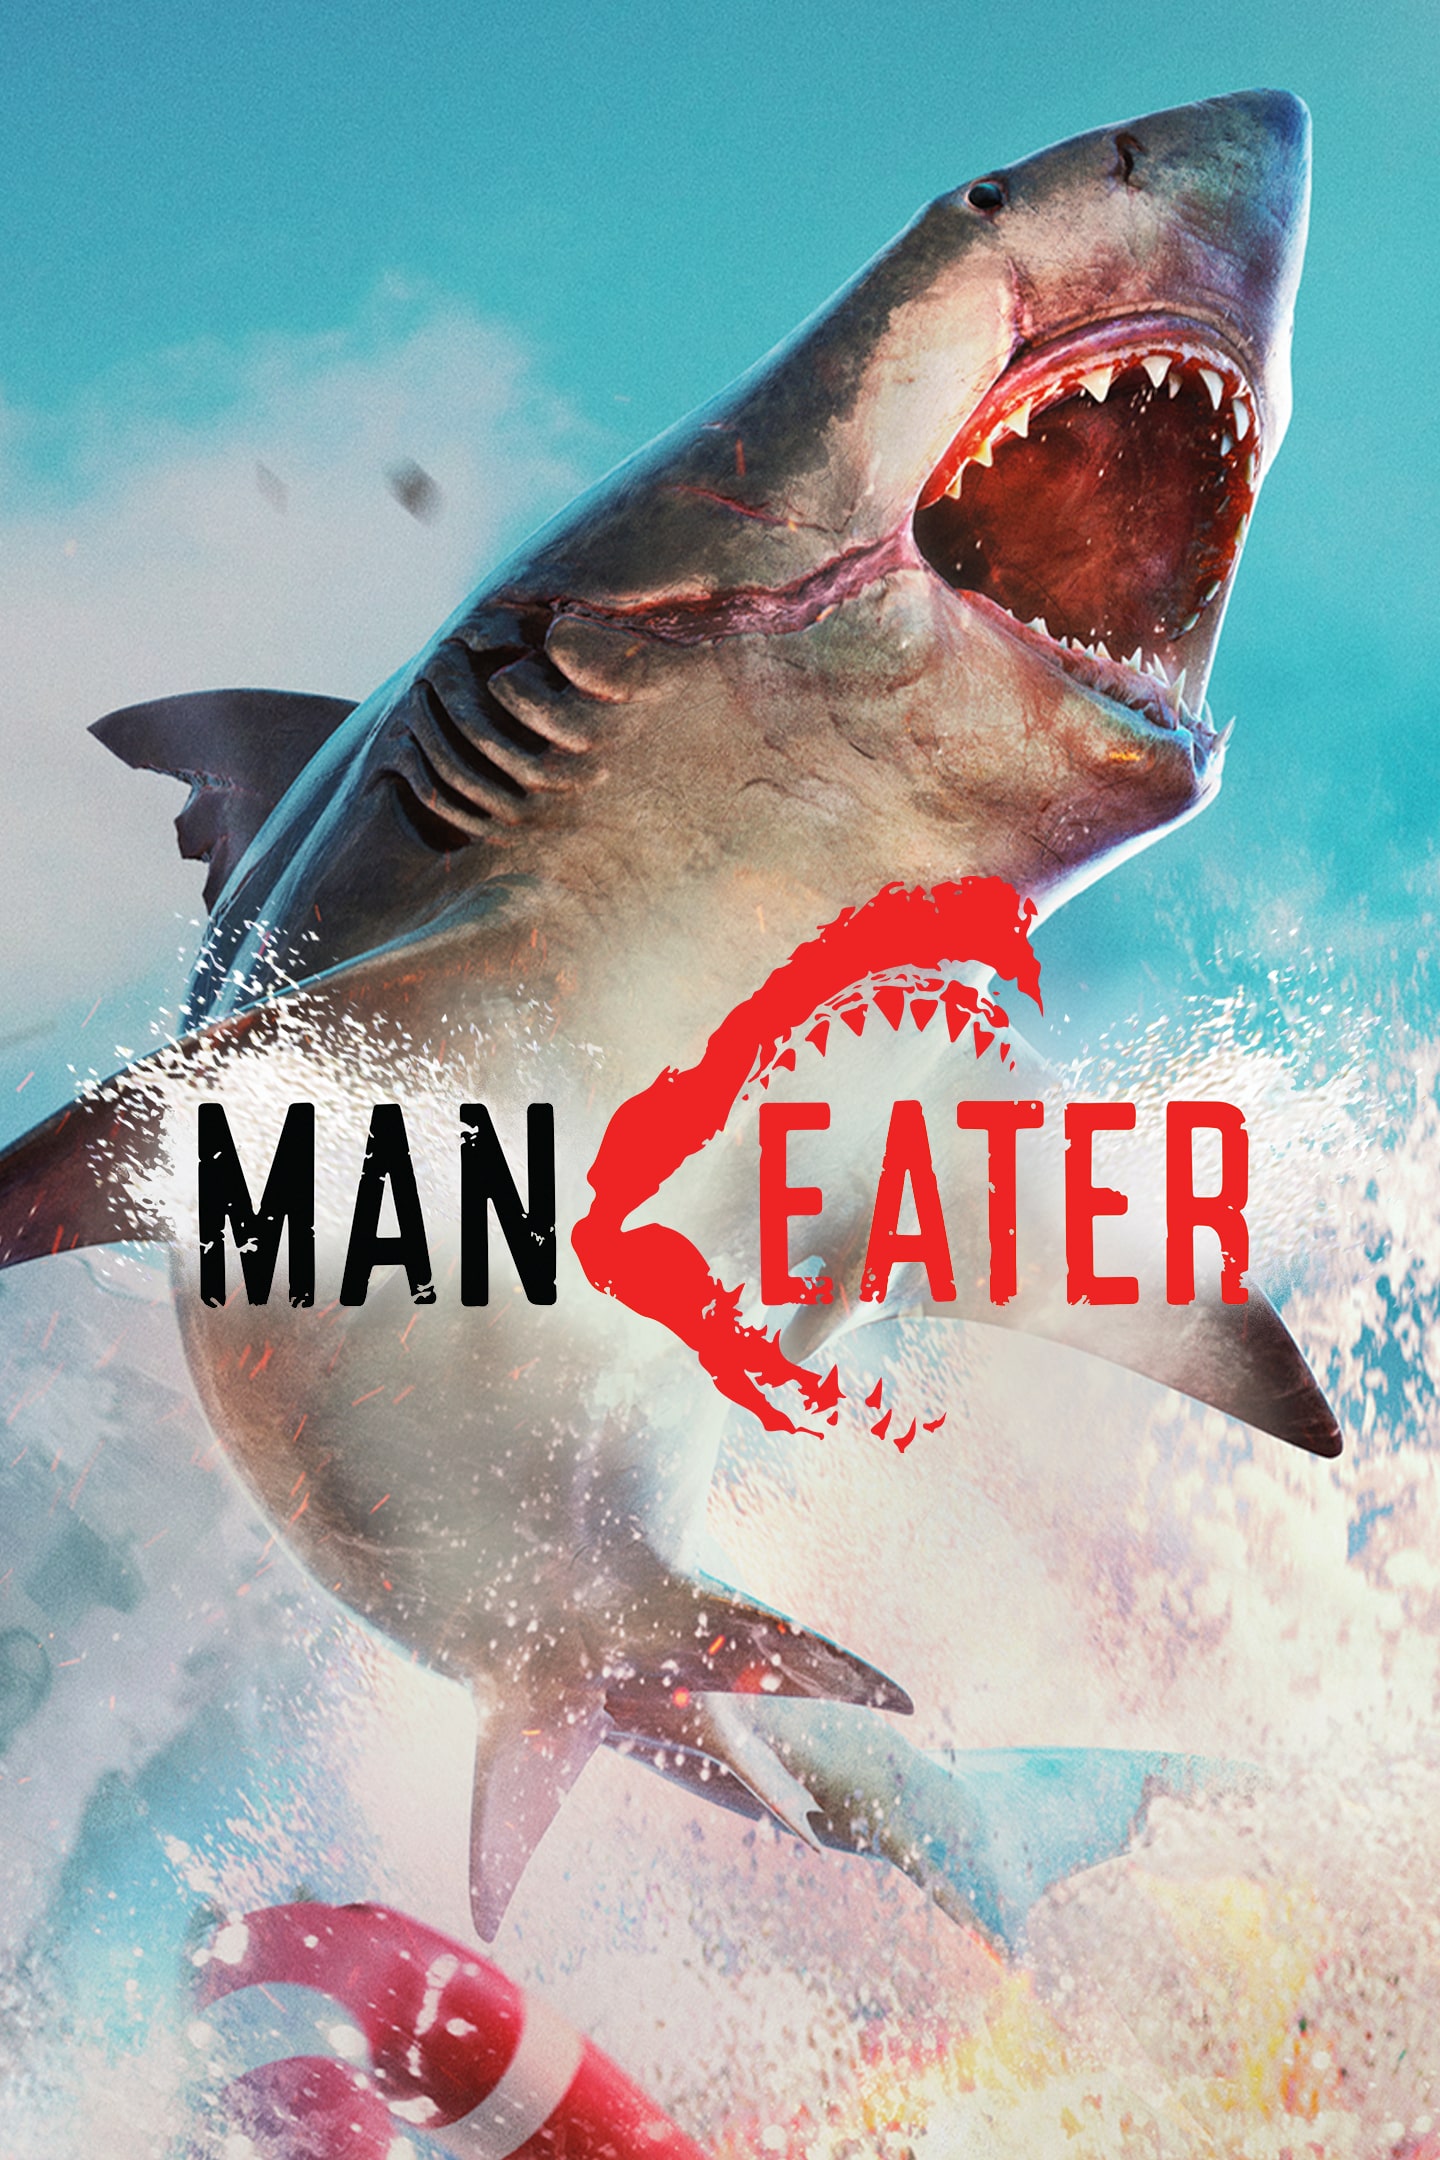 maneater ps4 age rating